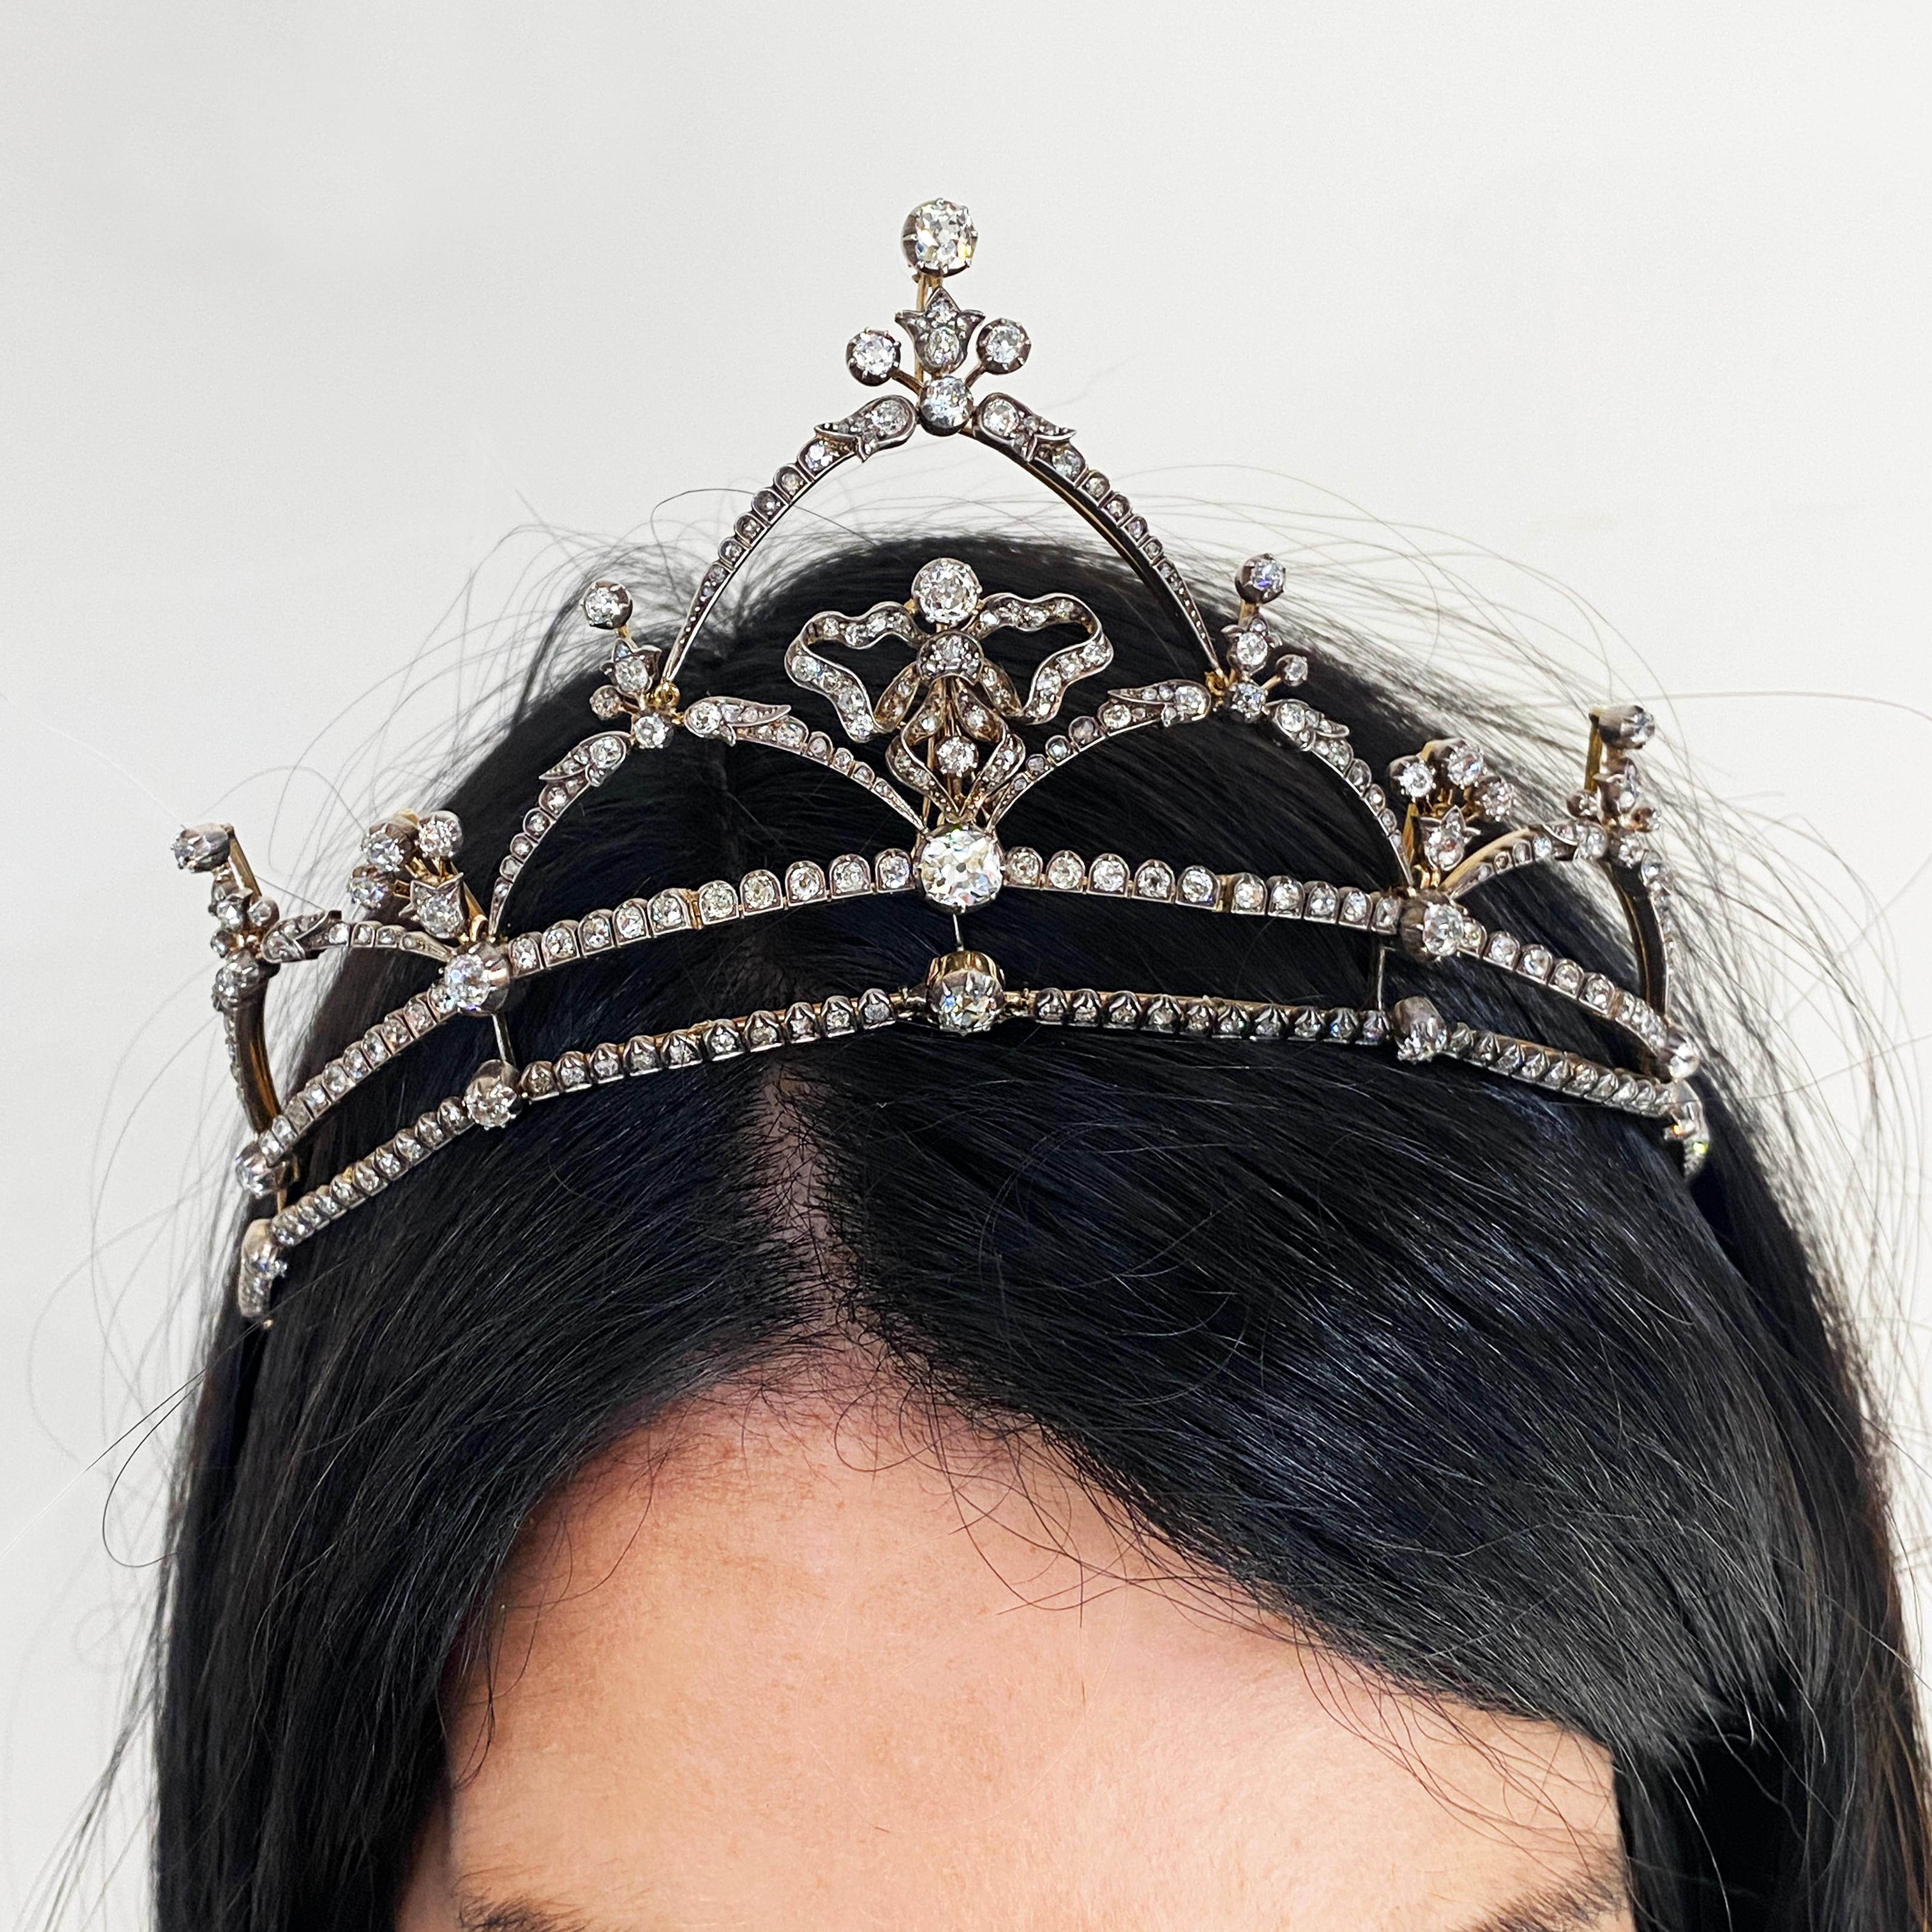 A late Victorian diamond tiara, with the option of converting into a necklace, comprised of an old-cut diamond set fringe swag, with an open bow design, the diamonds set in silver cut-down settings with gold galleries. Set with an estimated total of